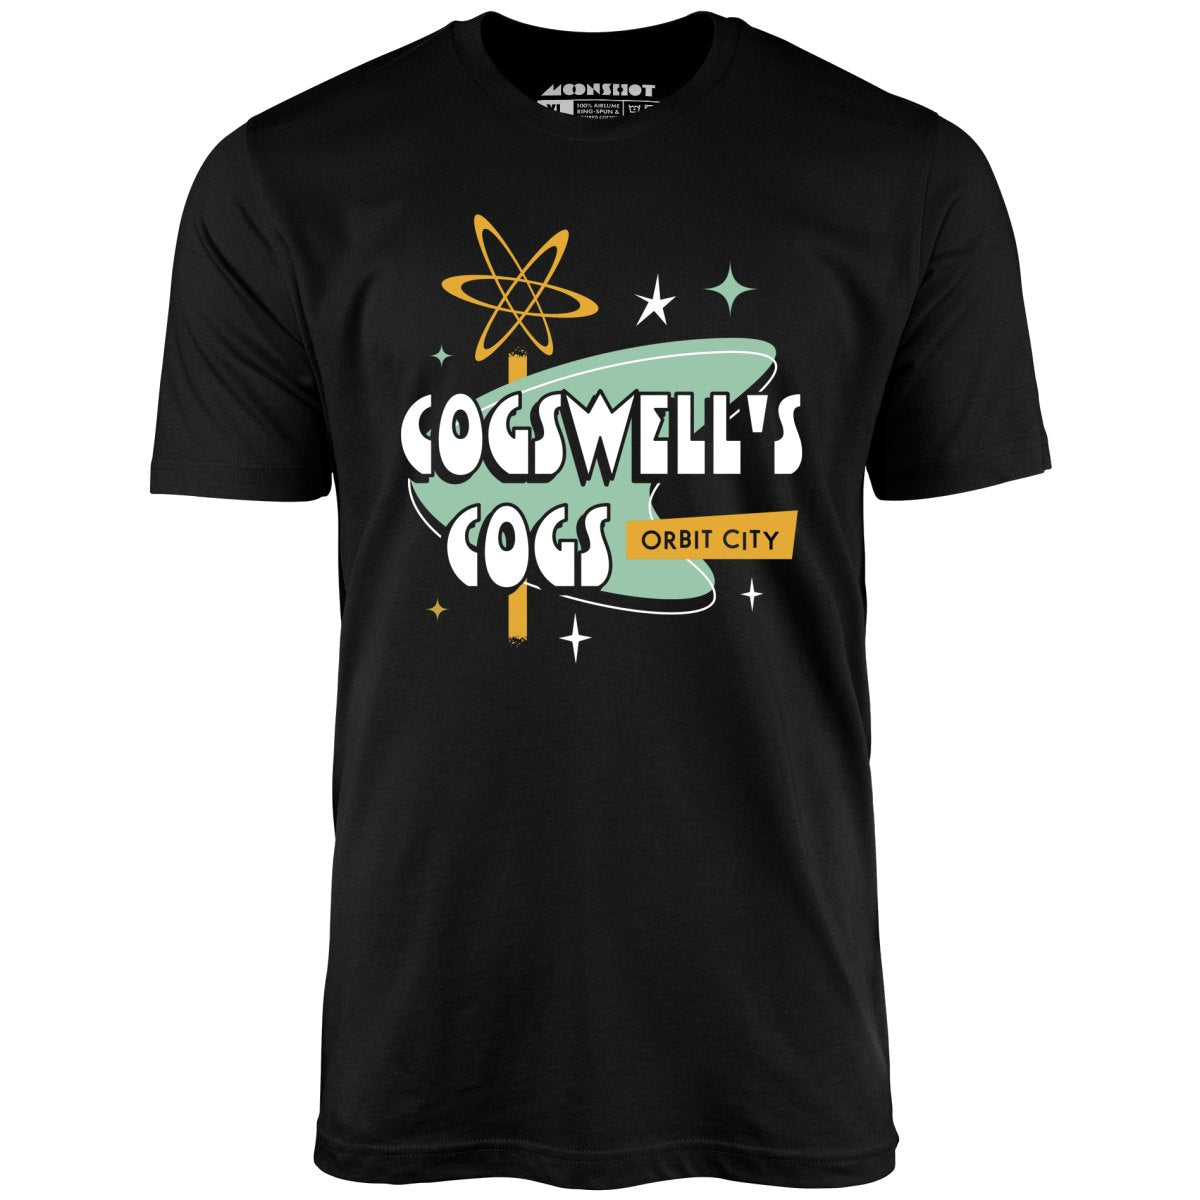 Cogswell's Cogs - Unisex T-Shirt